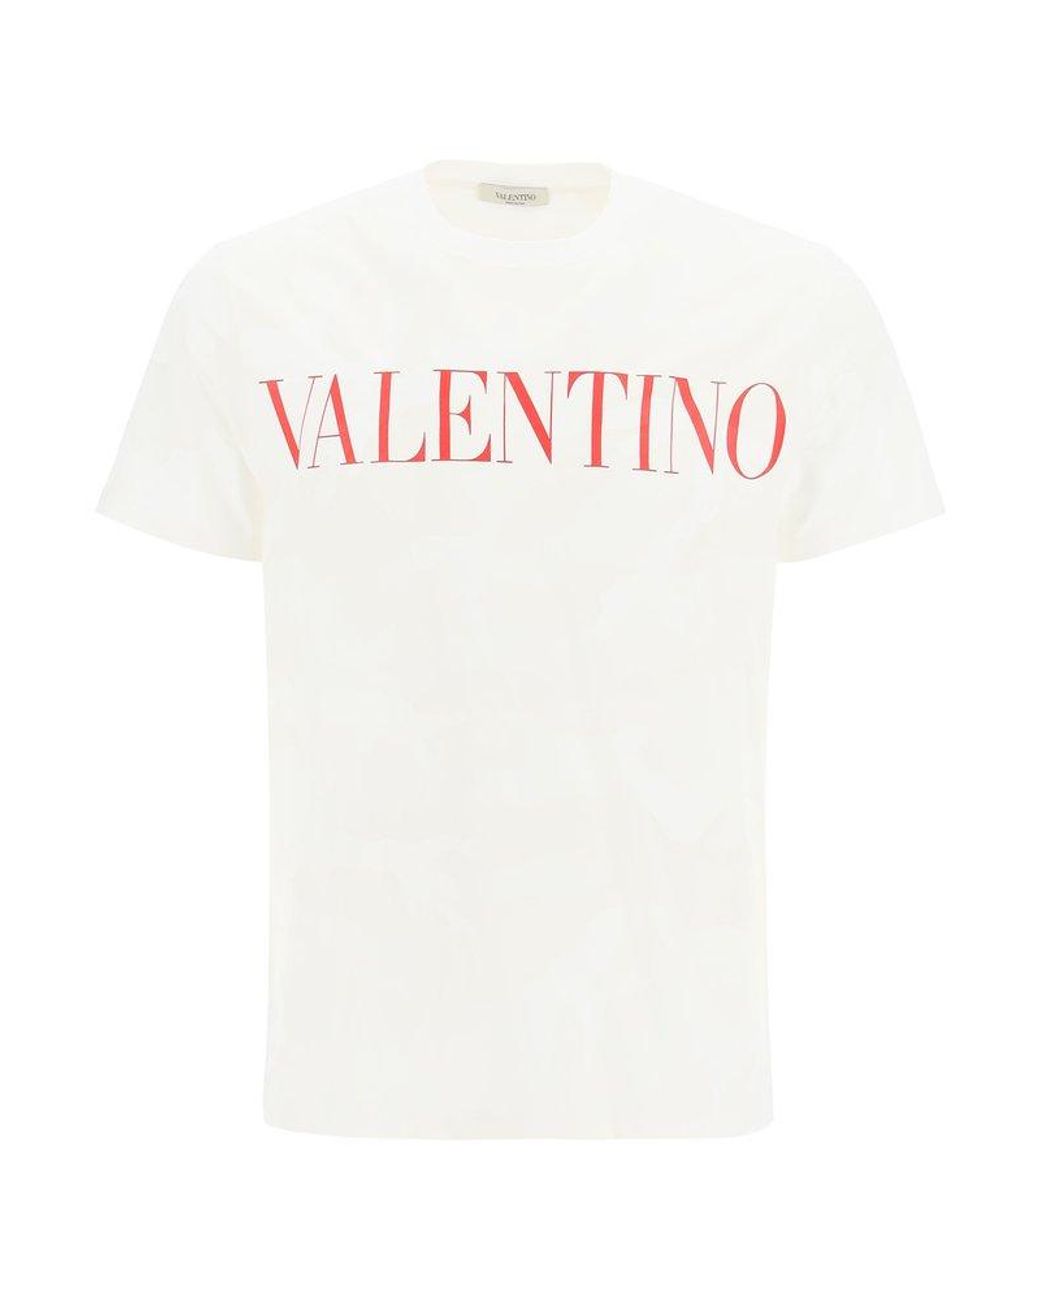 Valentino T-shirt Camouflage S Cotton in White for Men - Save 41 